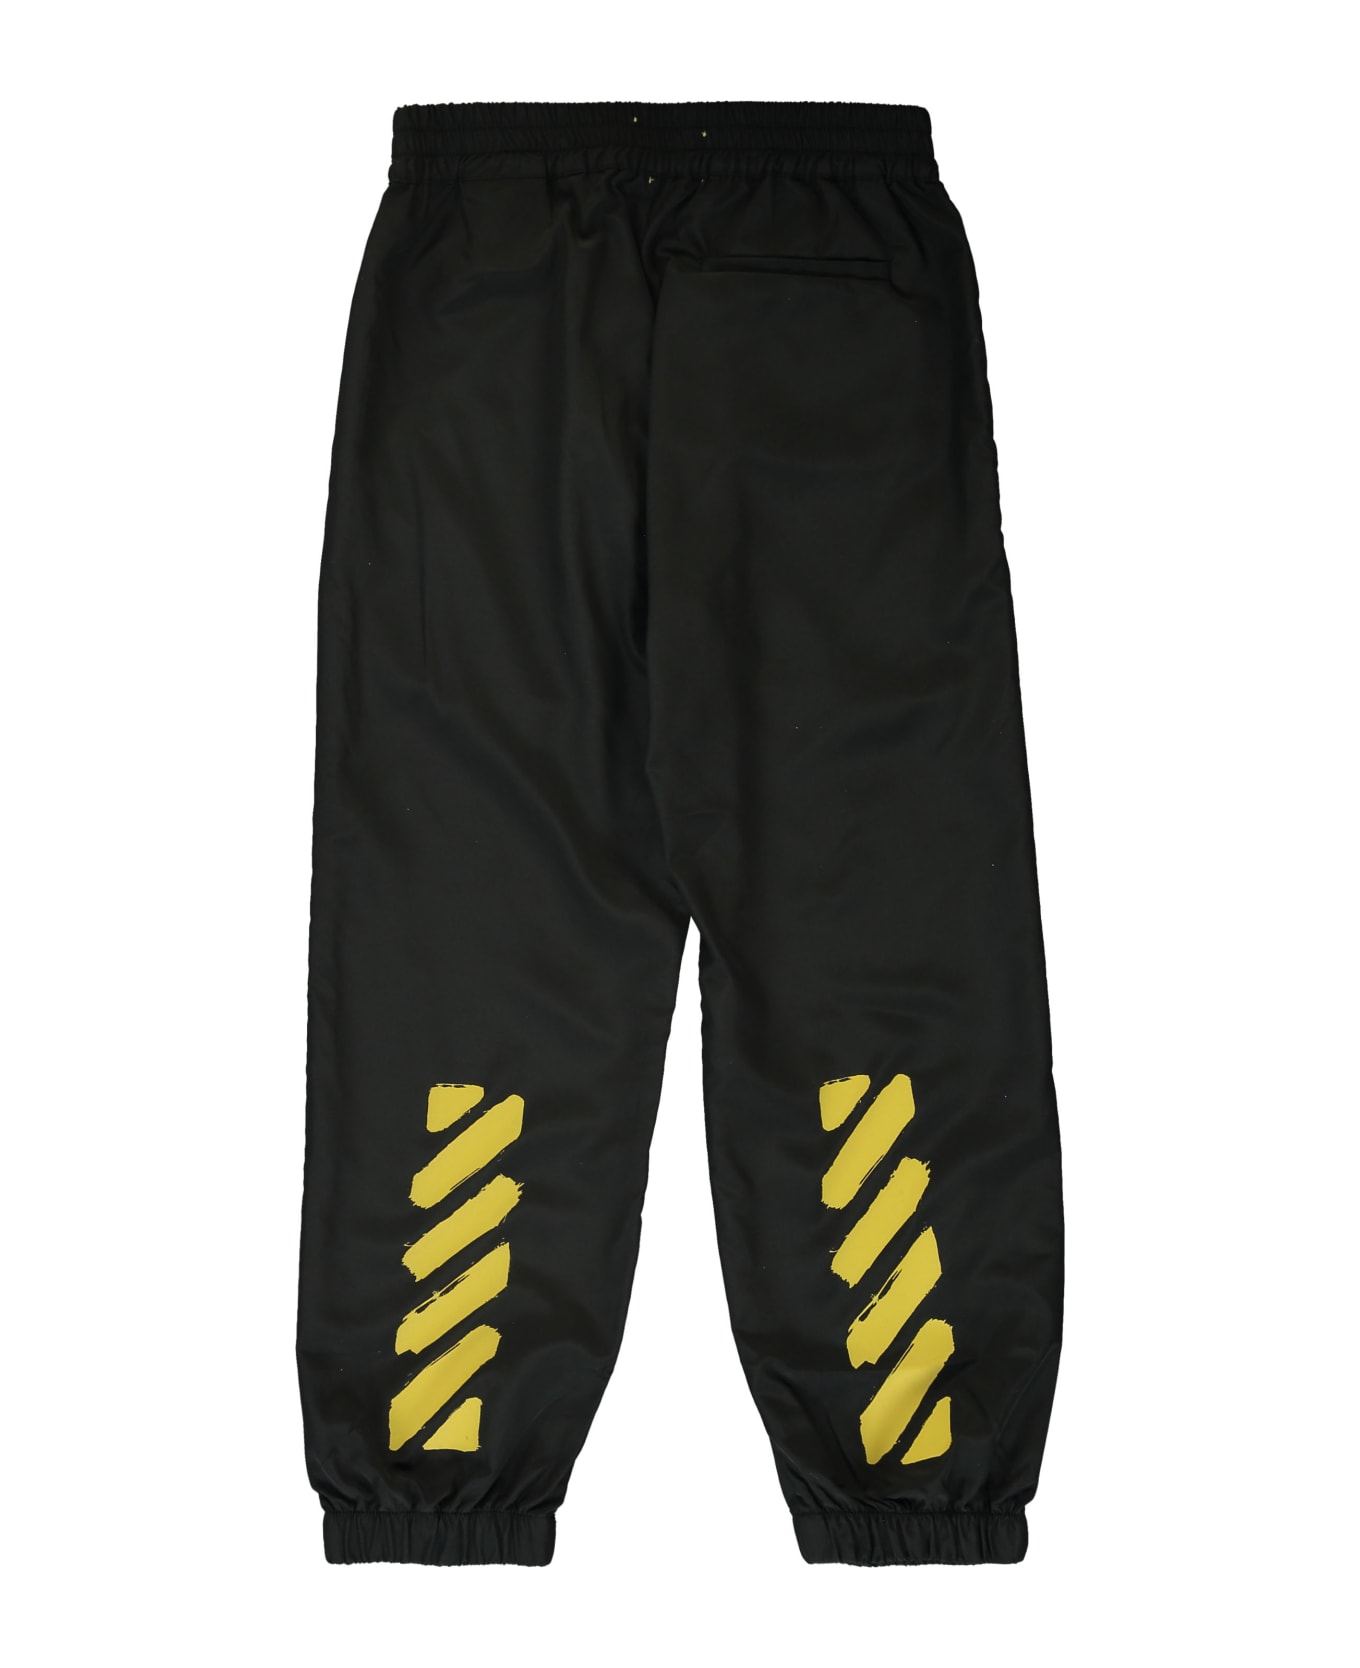 Off-White Technical Fabric Pants - black